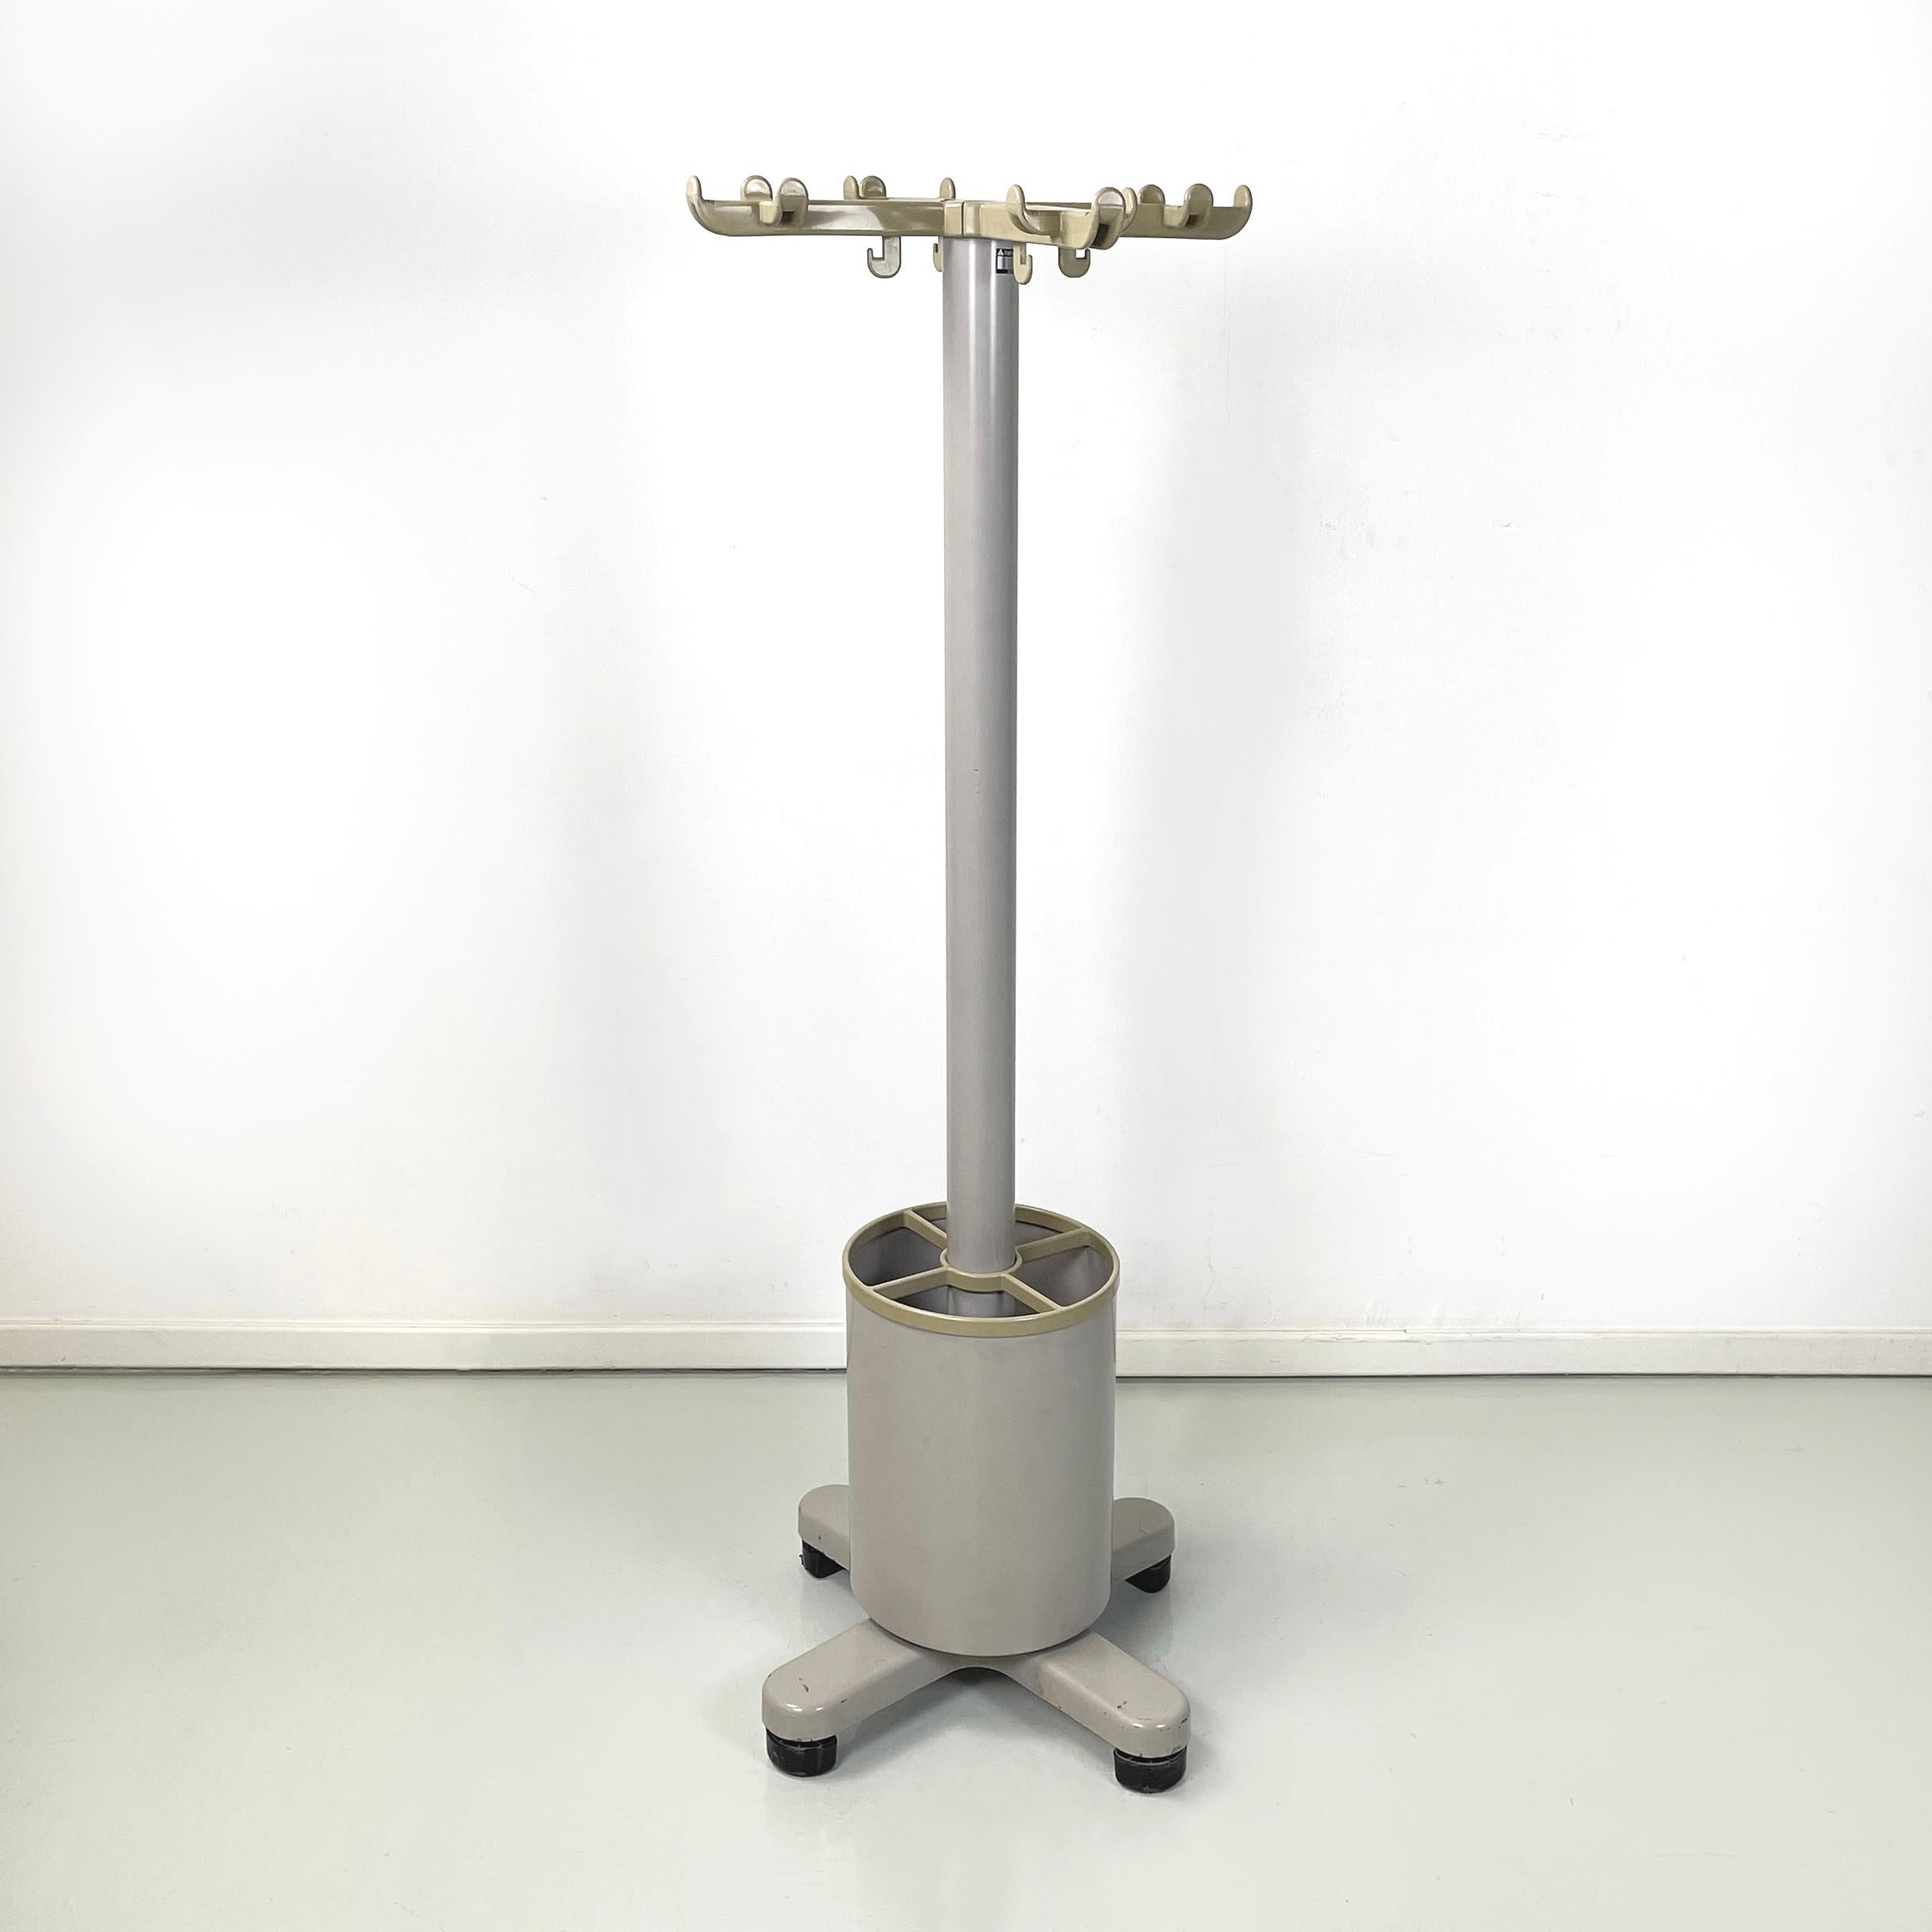 Italian modern floor coat hanger mod. Synthesis 45 with umbrella stand by Ettore Sottsass, 1990s
Floor coat hanger mod. Synthesis 45 with round base umbrella stand. In the upper part it has 4 arms with 4 hooks each, in beige plastic. The central